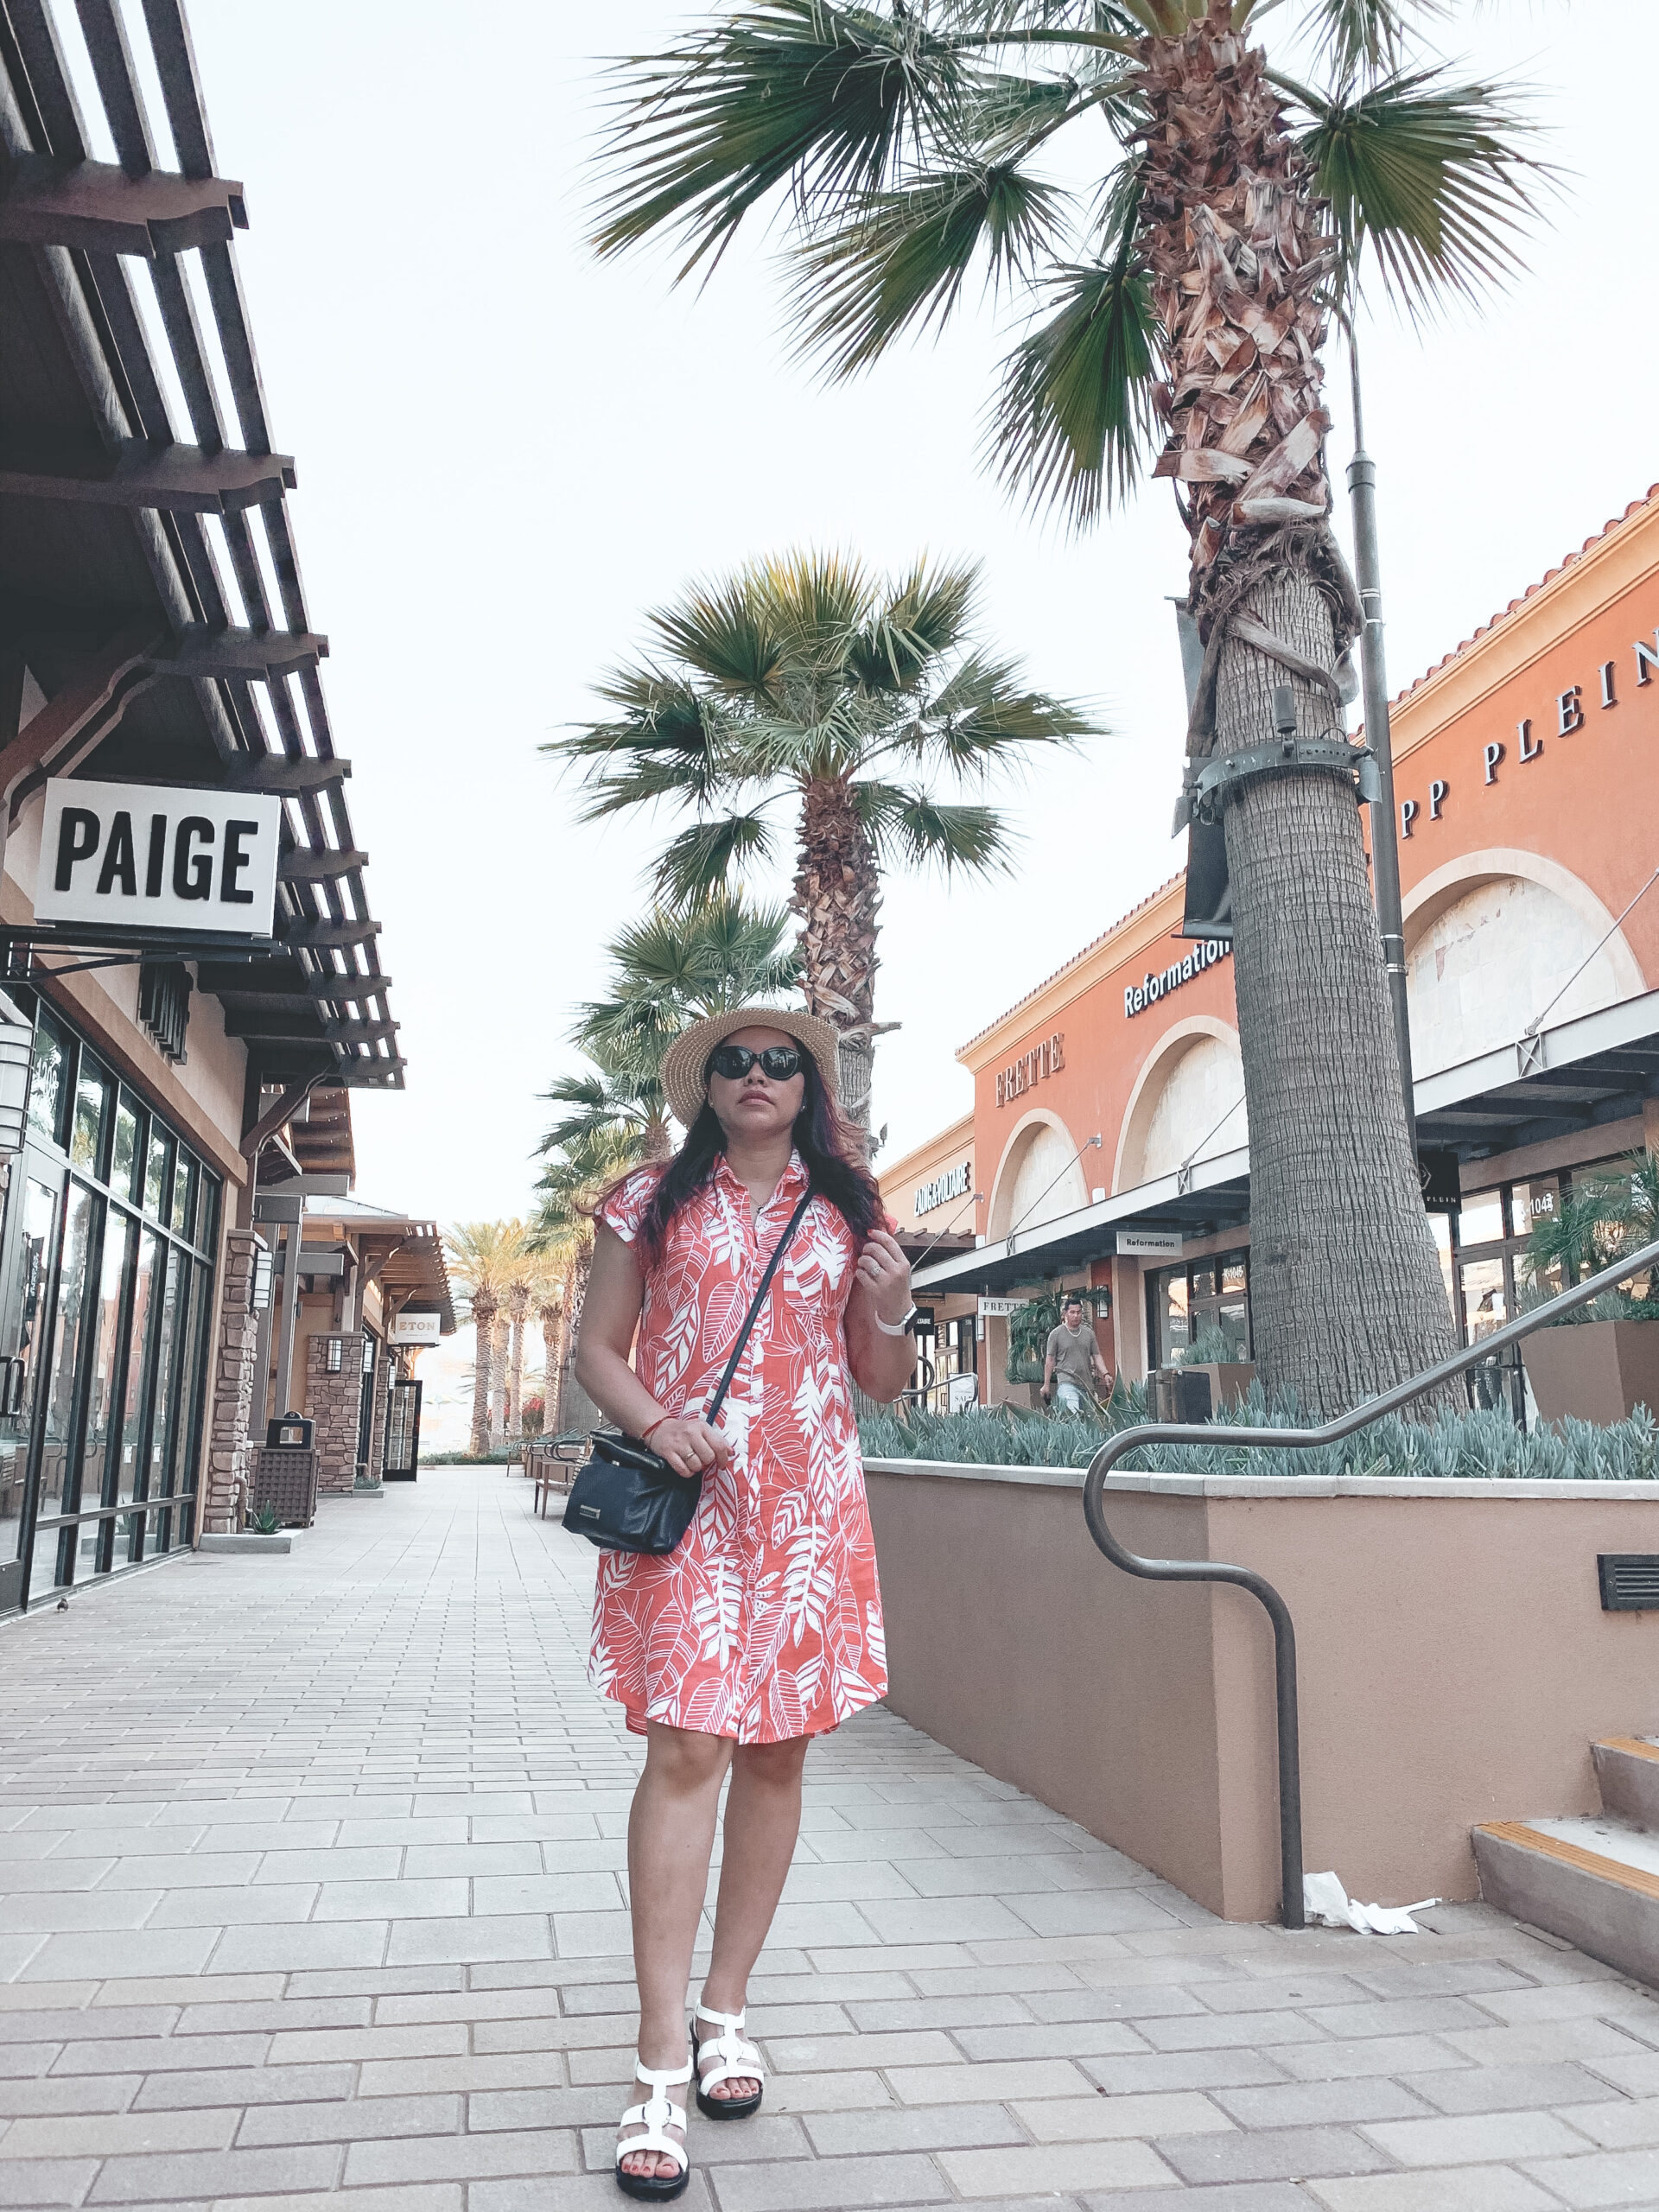 pslilyboutique-on-instagram-pinterest-4th-of-july-2020-outfit-ideas-summer-2020-style-old-navy-pink-floral-dress-skechers-shoes-blue-paige-frette-reformation-phillip-plein-kenneth-cole-hand-bag-IMG_0662, Instagram: @pslilyboutique, Pinterest, Los Angeles fashion blogger, top fashion blog, best fashion blog, fashion & personal style blog, travel blog, lifestyle blogger, travel blogger, LA fashion blogger, chicago based fashion blogger, fashion influencer, luxury fashion, luxury travel, luxury influencer, luxury lifestyle, lifestyle blog, amazon influencer